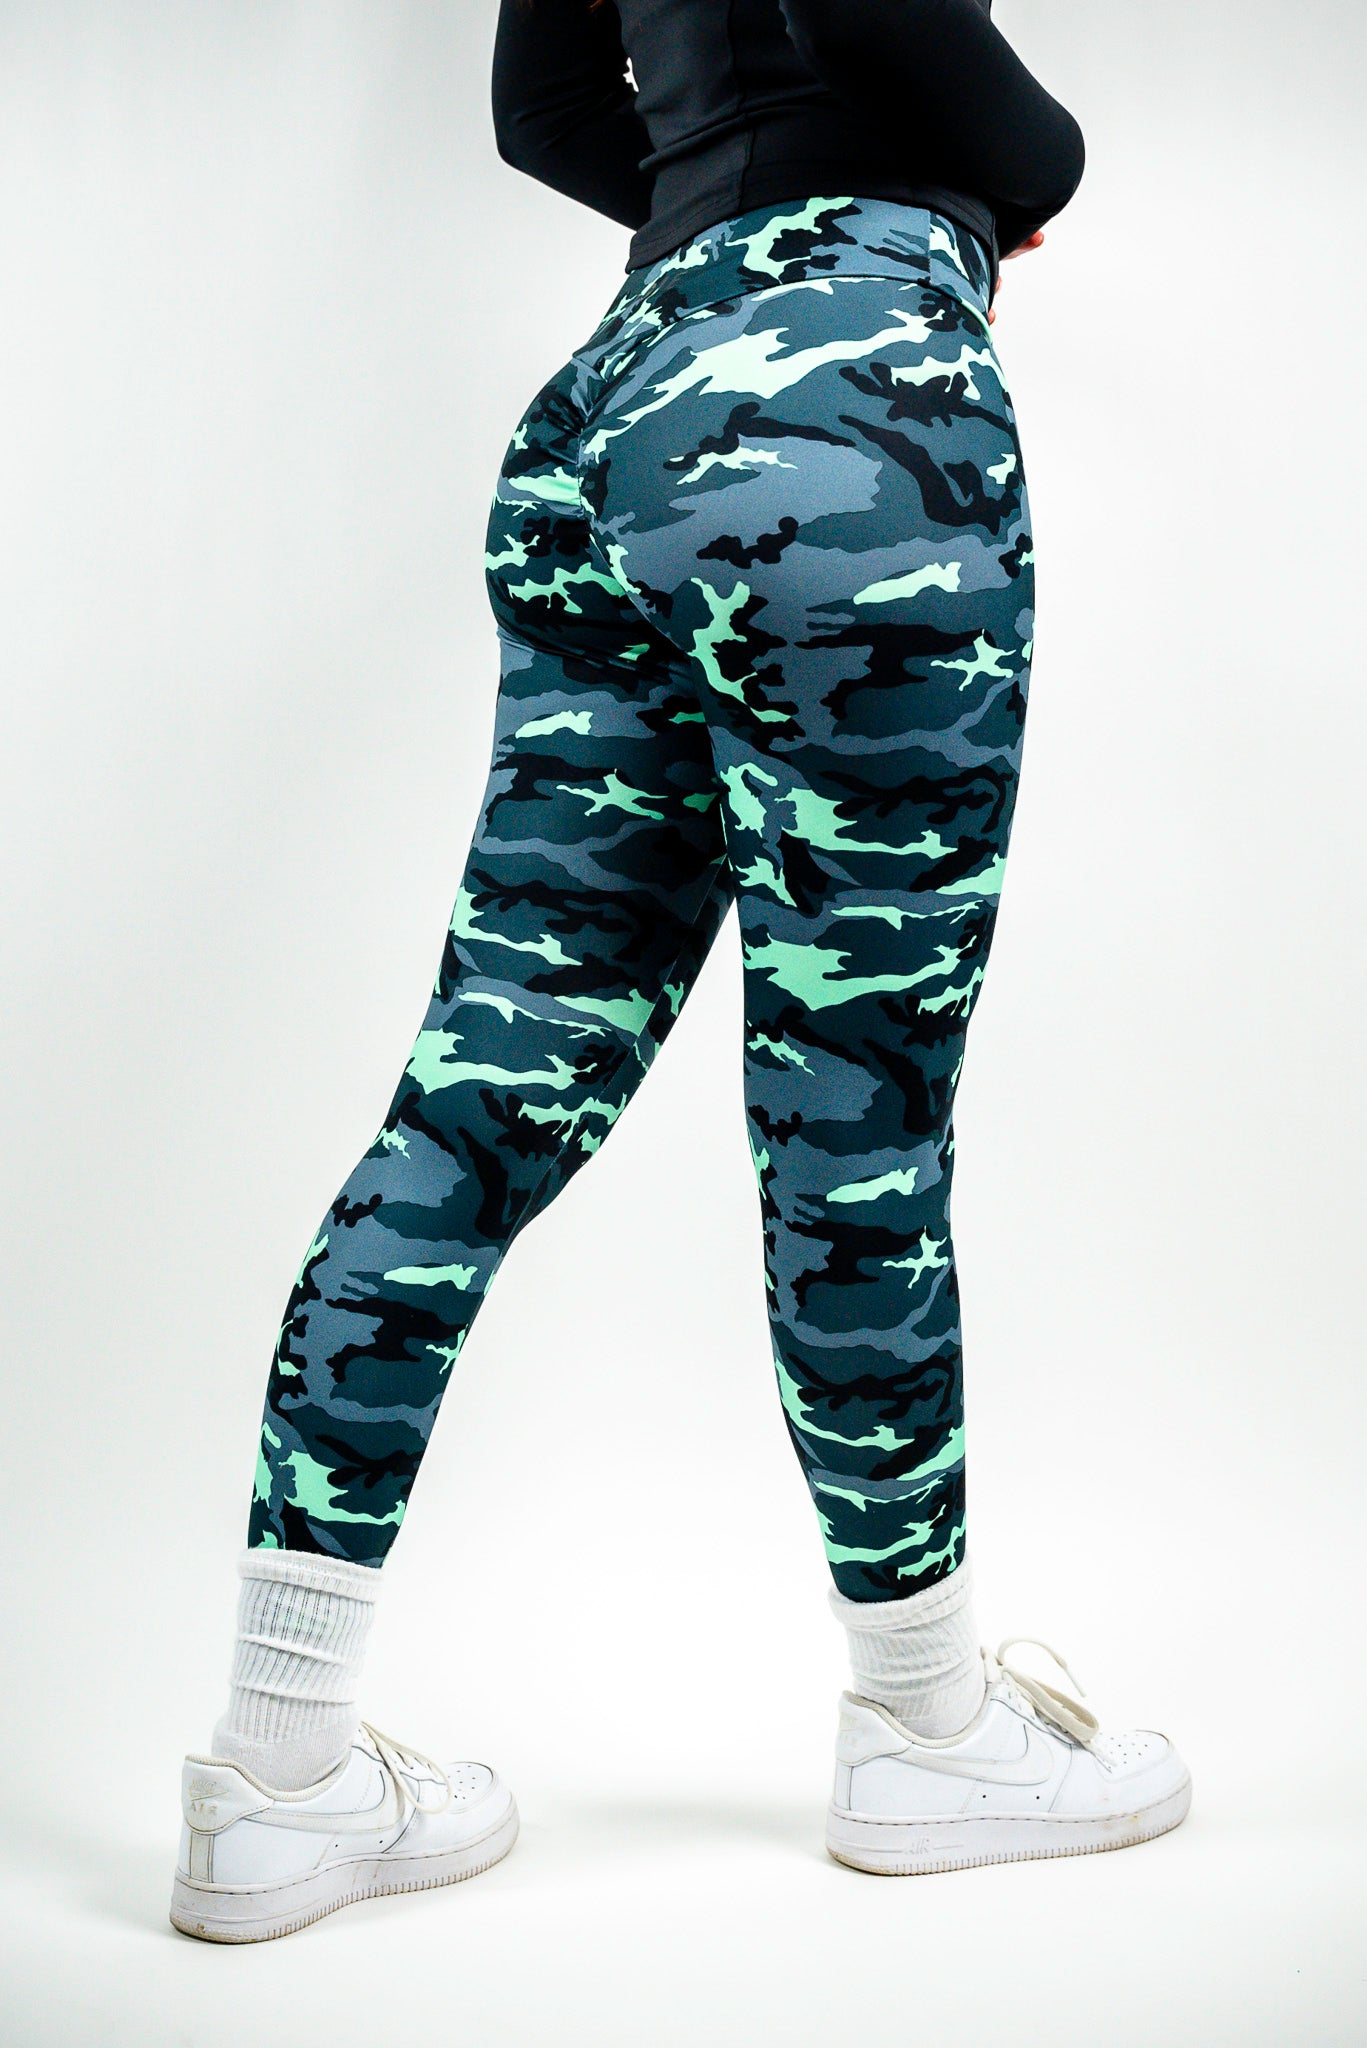 Beautiful Zoe is wearing size small mint camo leggings. Hips are 39 inches and waist 27 inches. Mint camo fabric runs smaller in size, so size up if in between sizes.